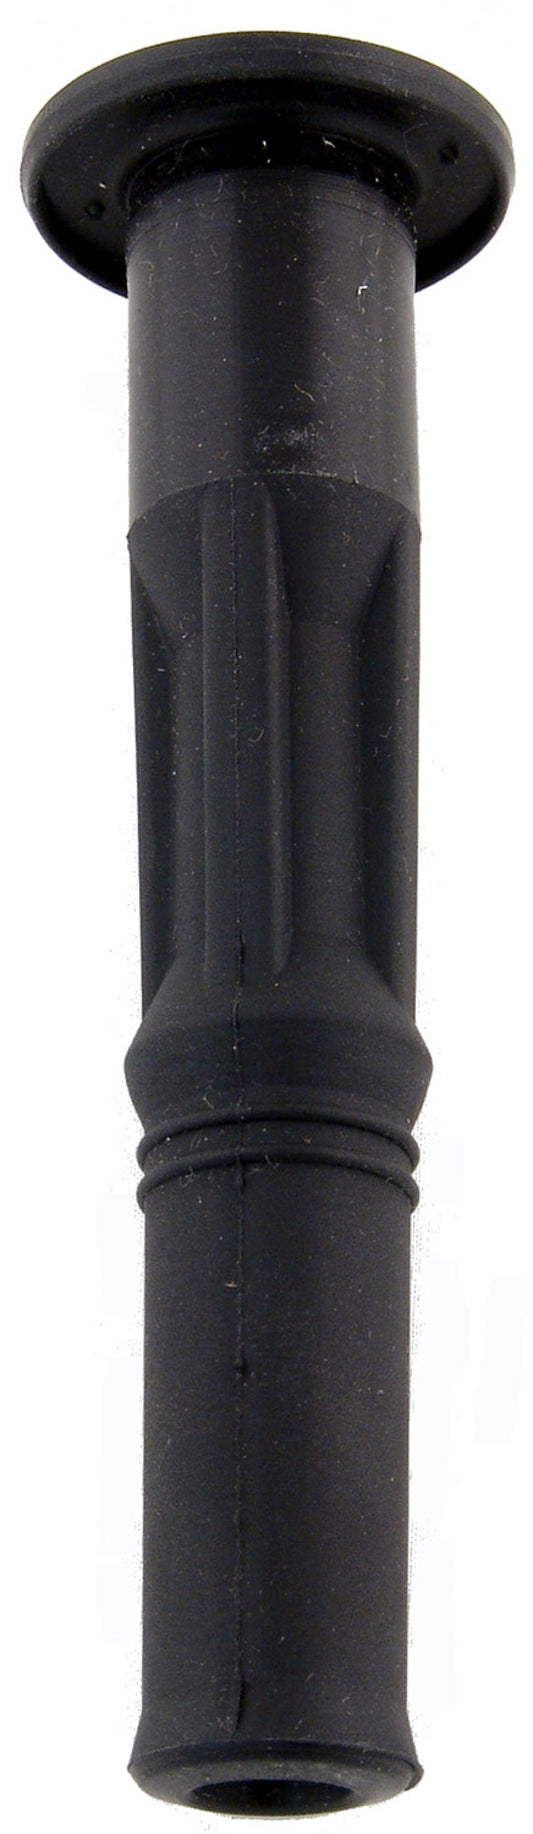 NGK Toyota Paseo 1999-1995 Direct Ignition Coil Boot